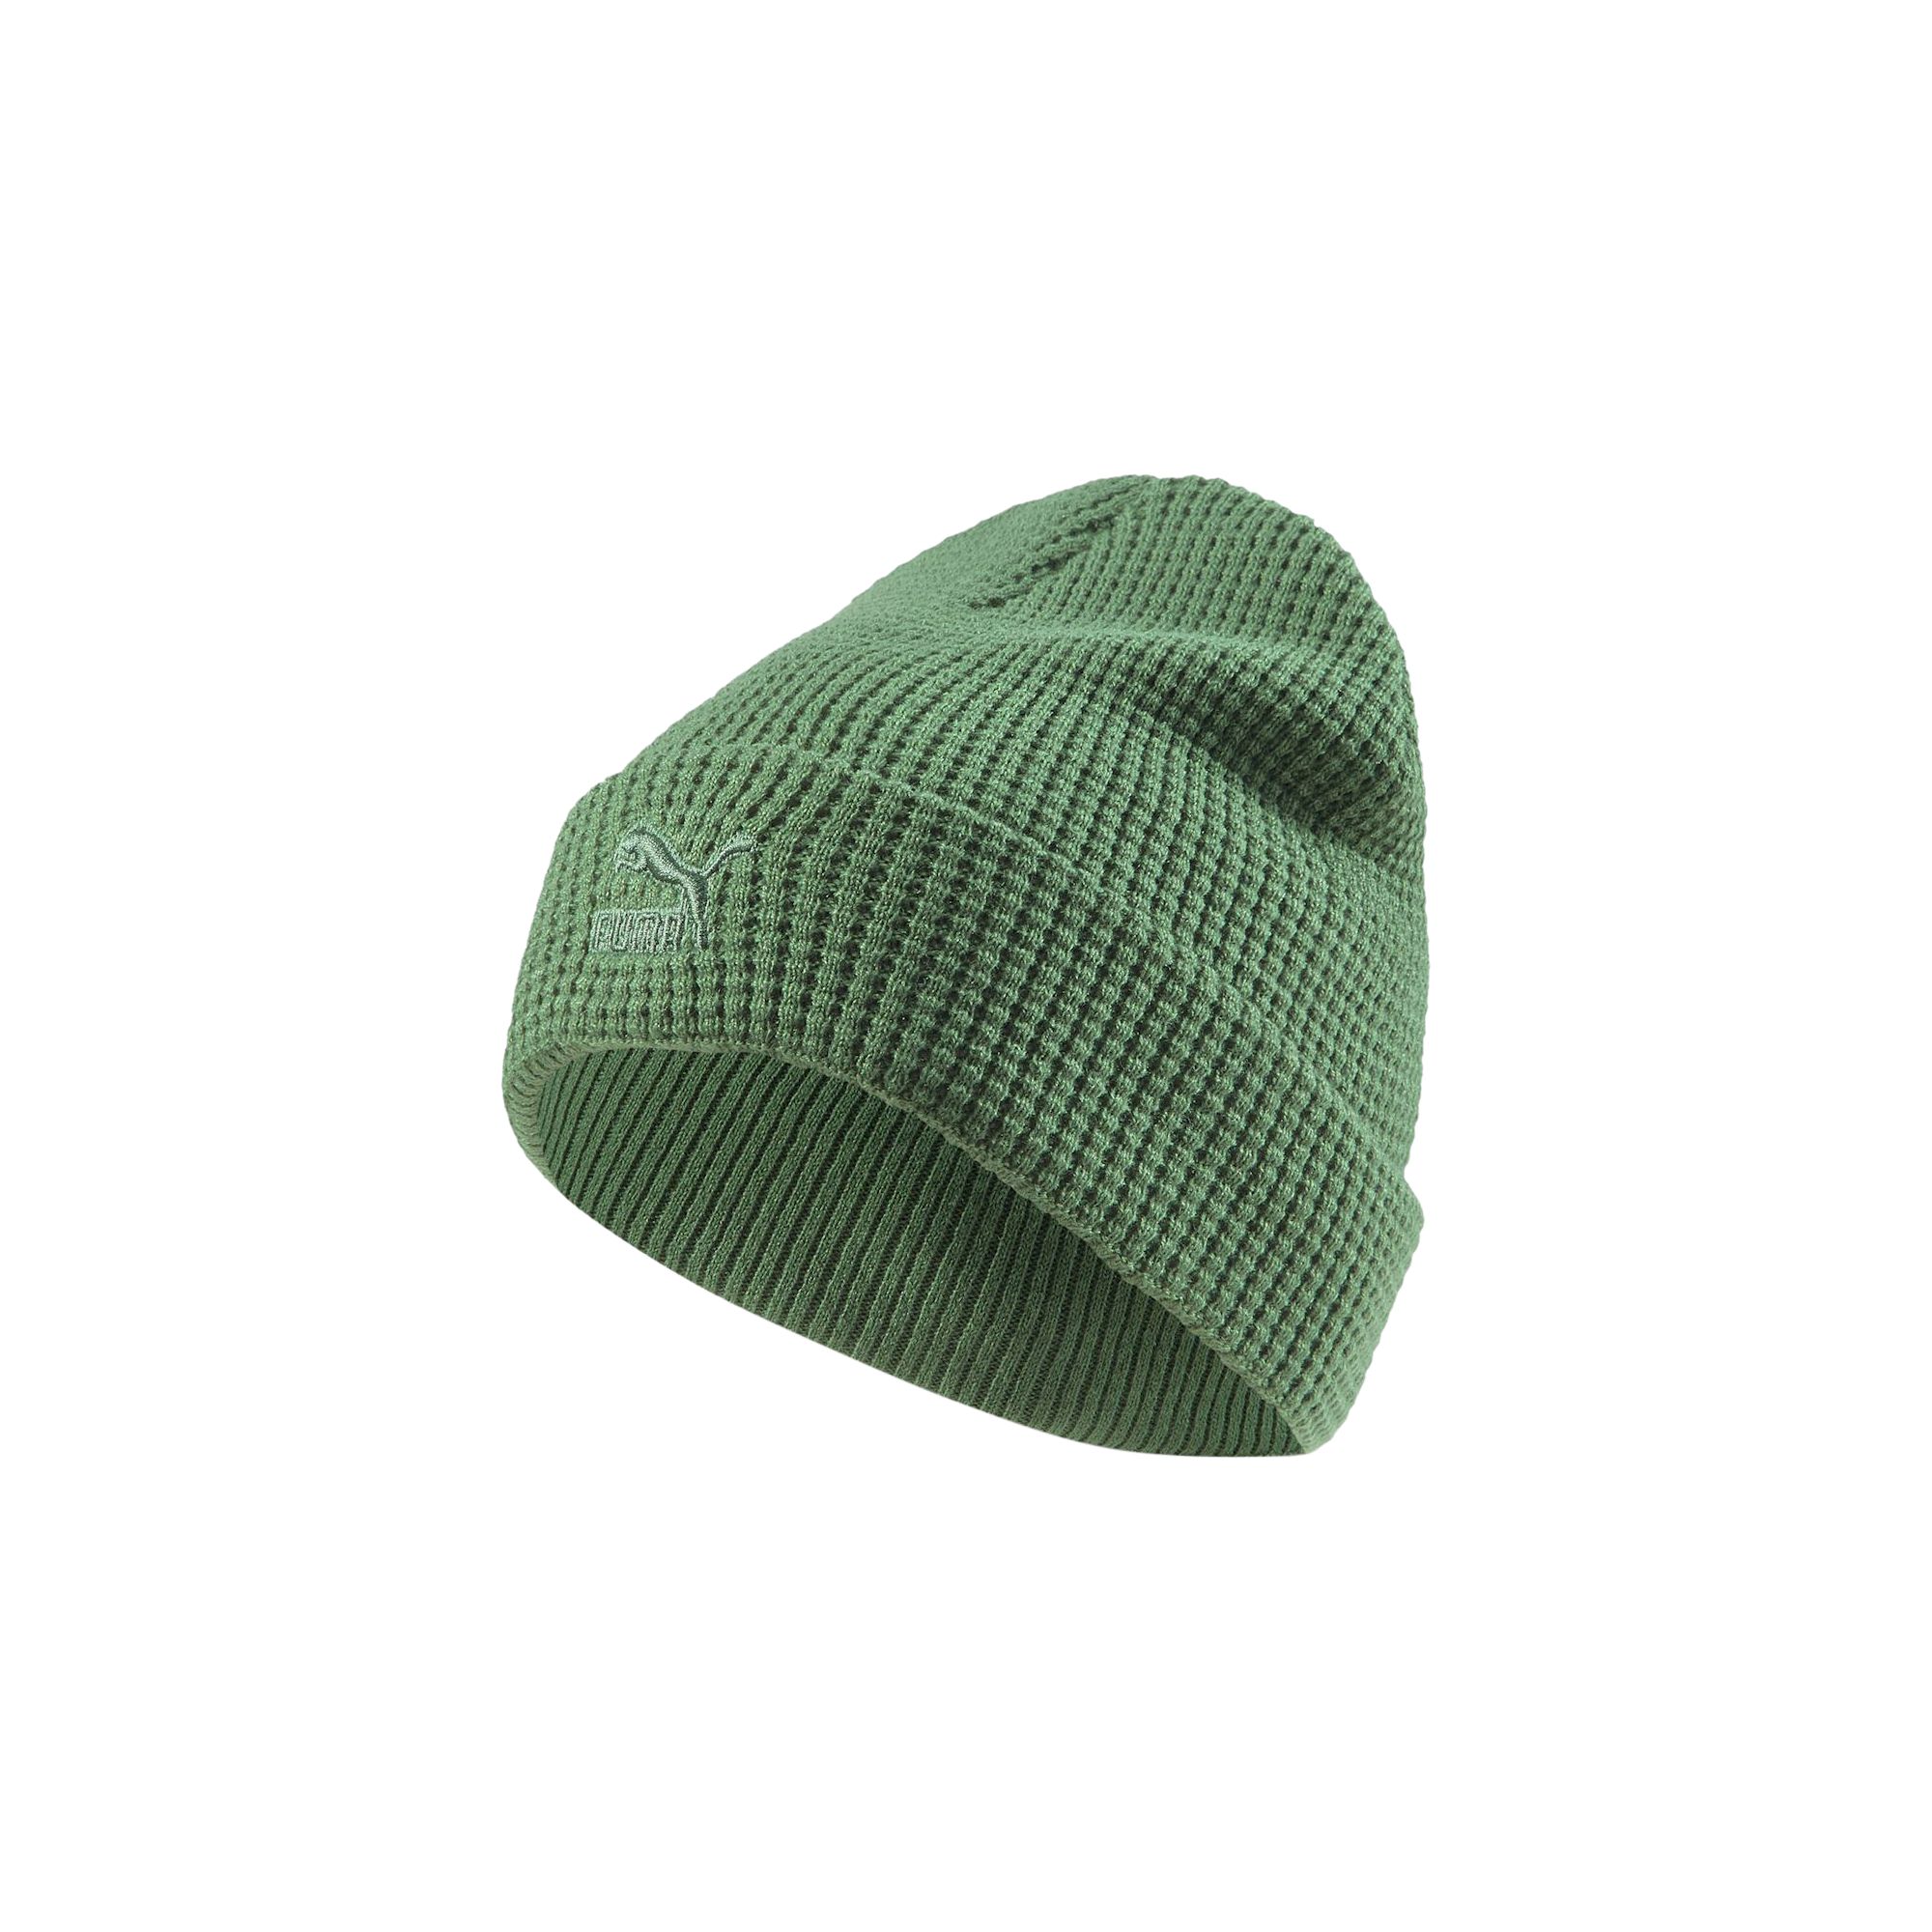 Archive mid fit beanie